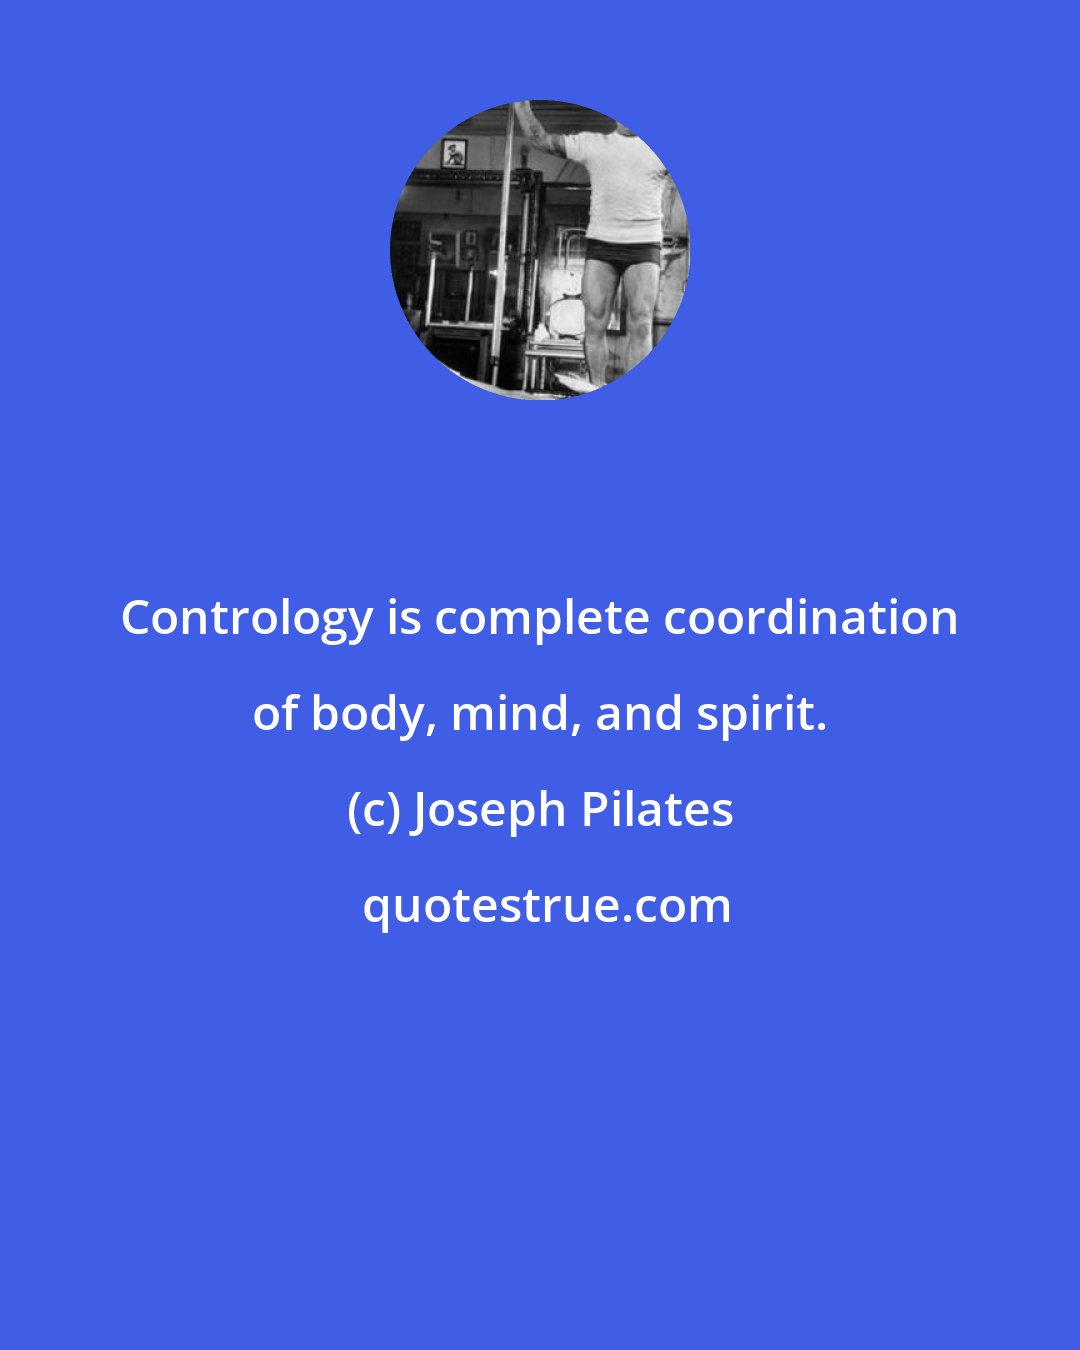 Joseph Pilates: Contrology is complete coordination of body, mind, and spirit.